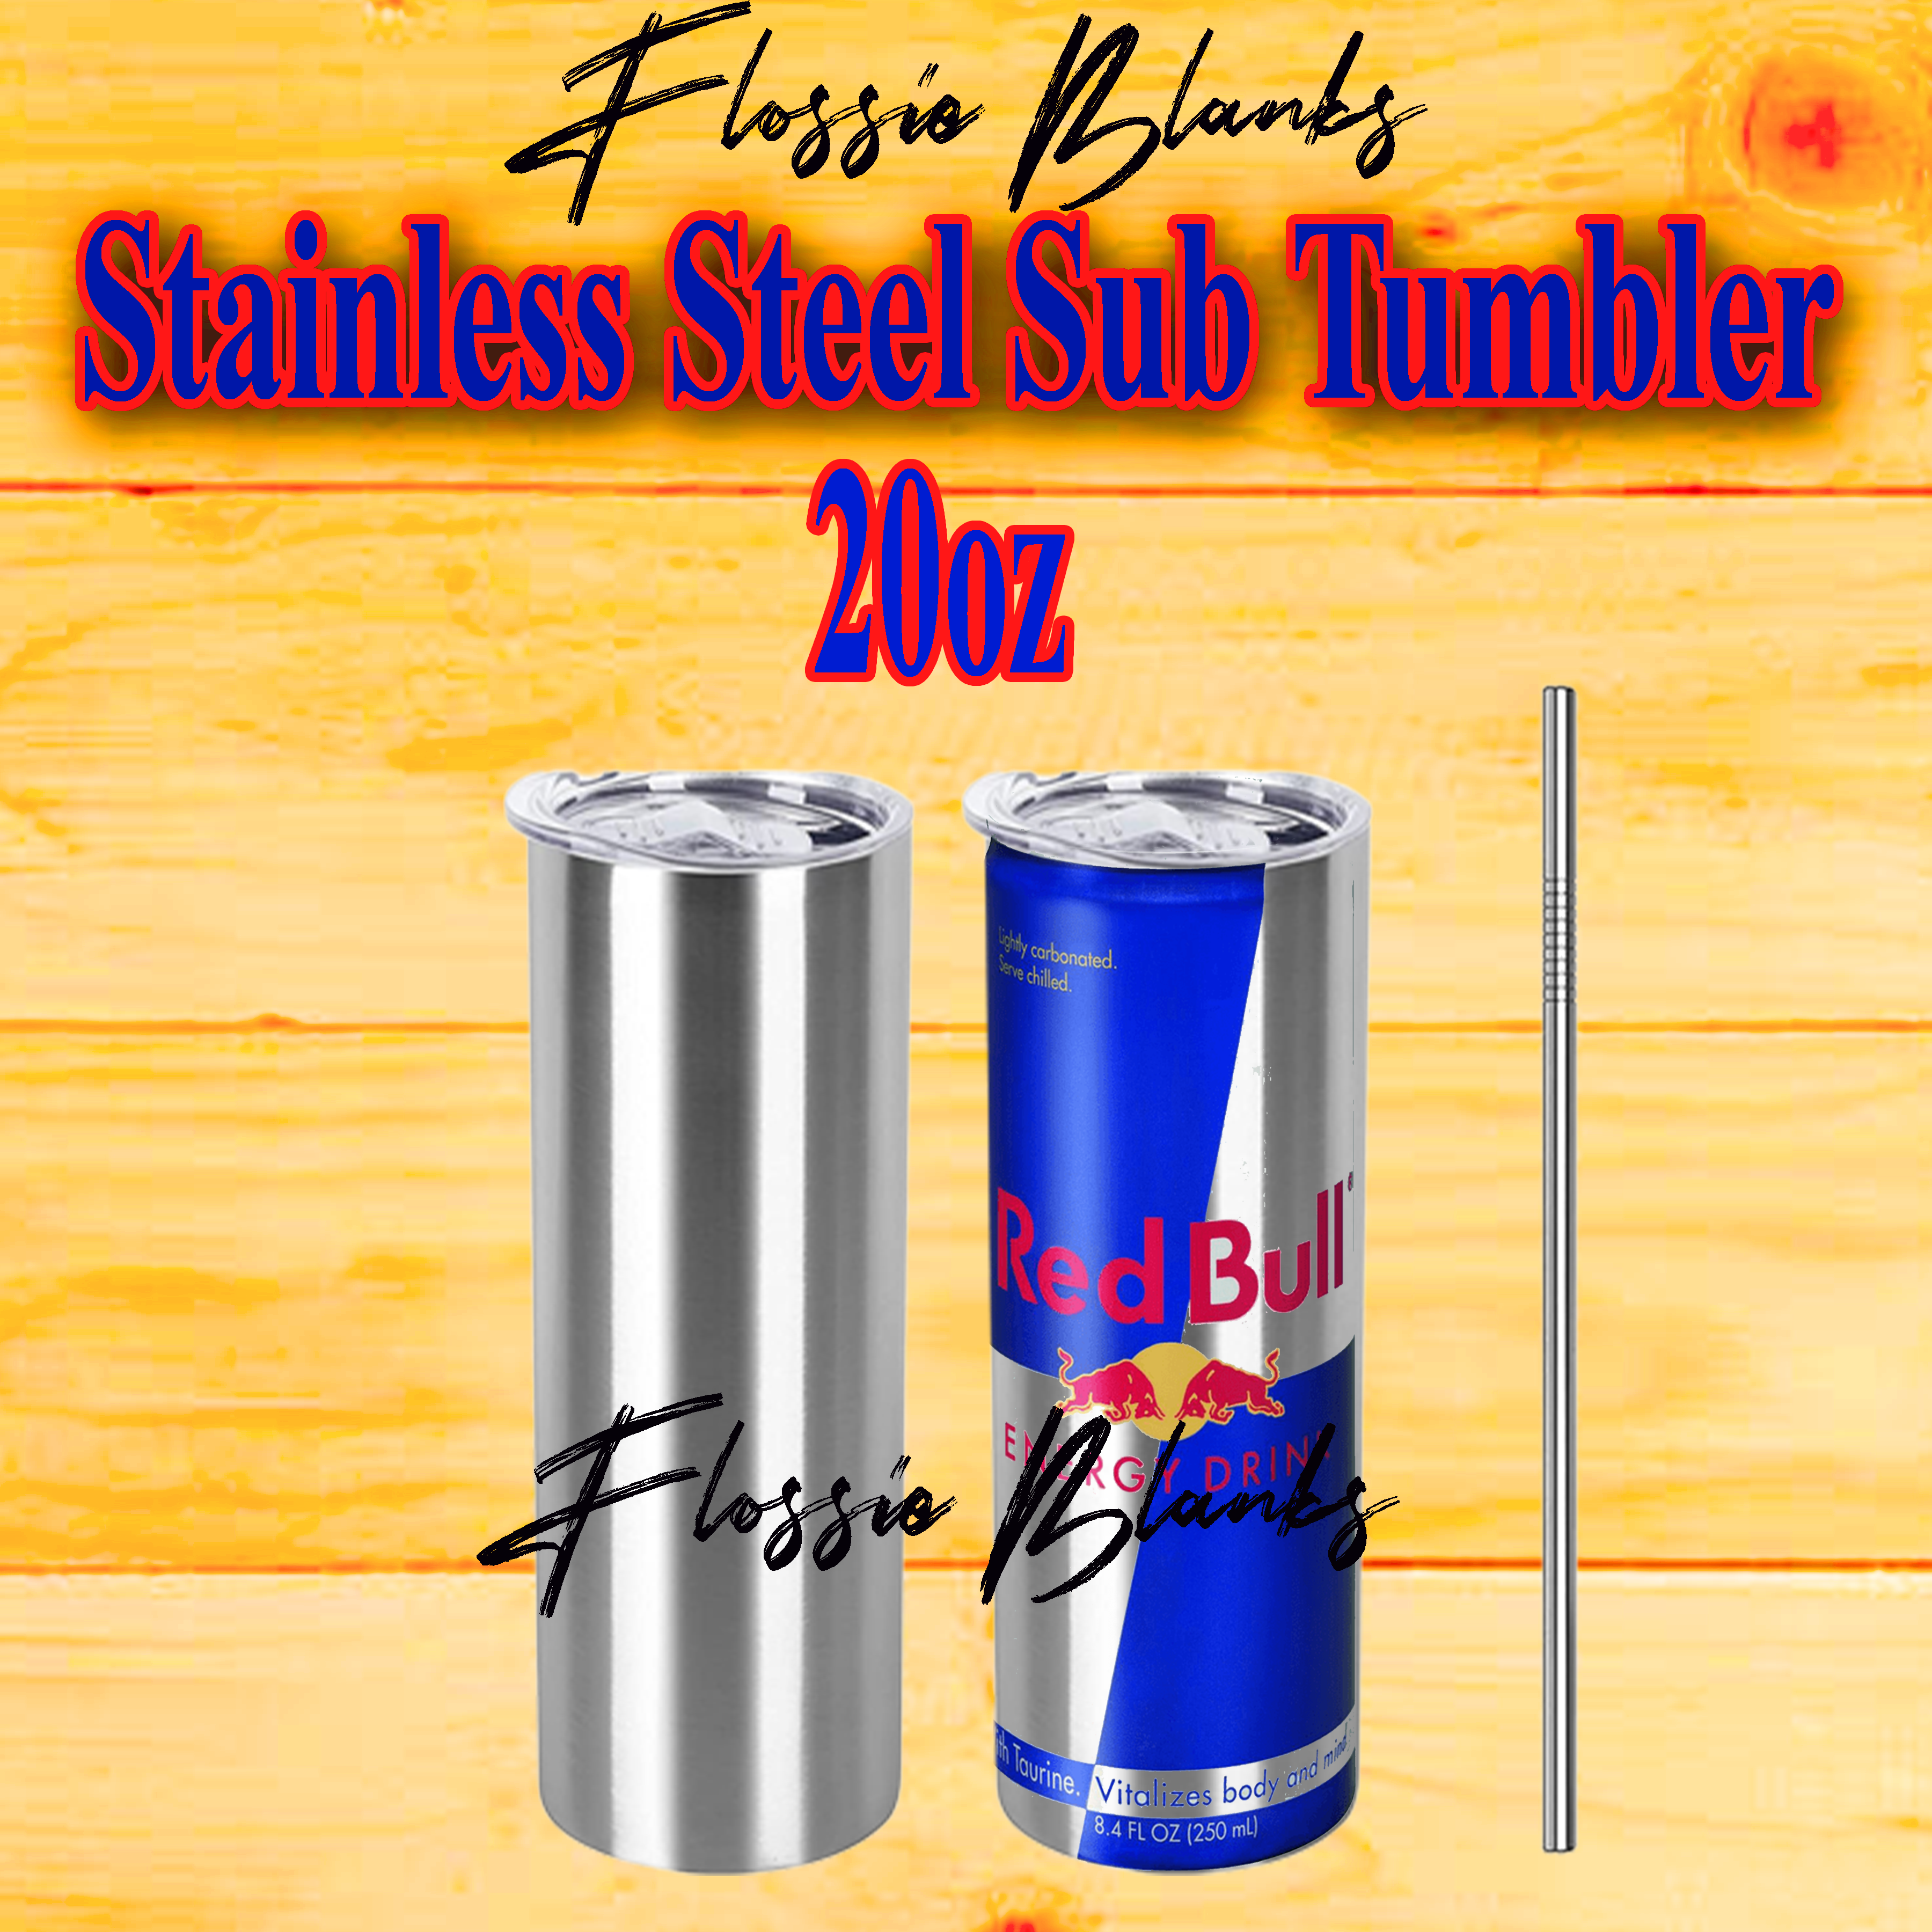 20oz Stainless Steel Sublimation Tumblers (BLANK)